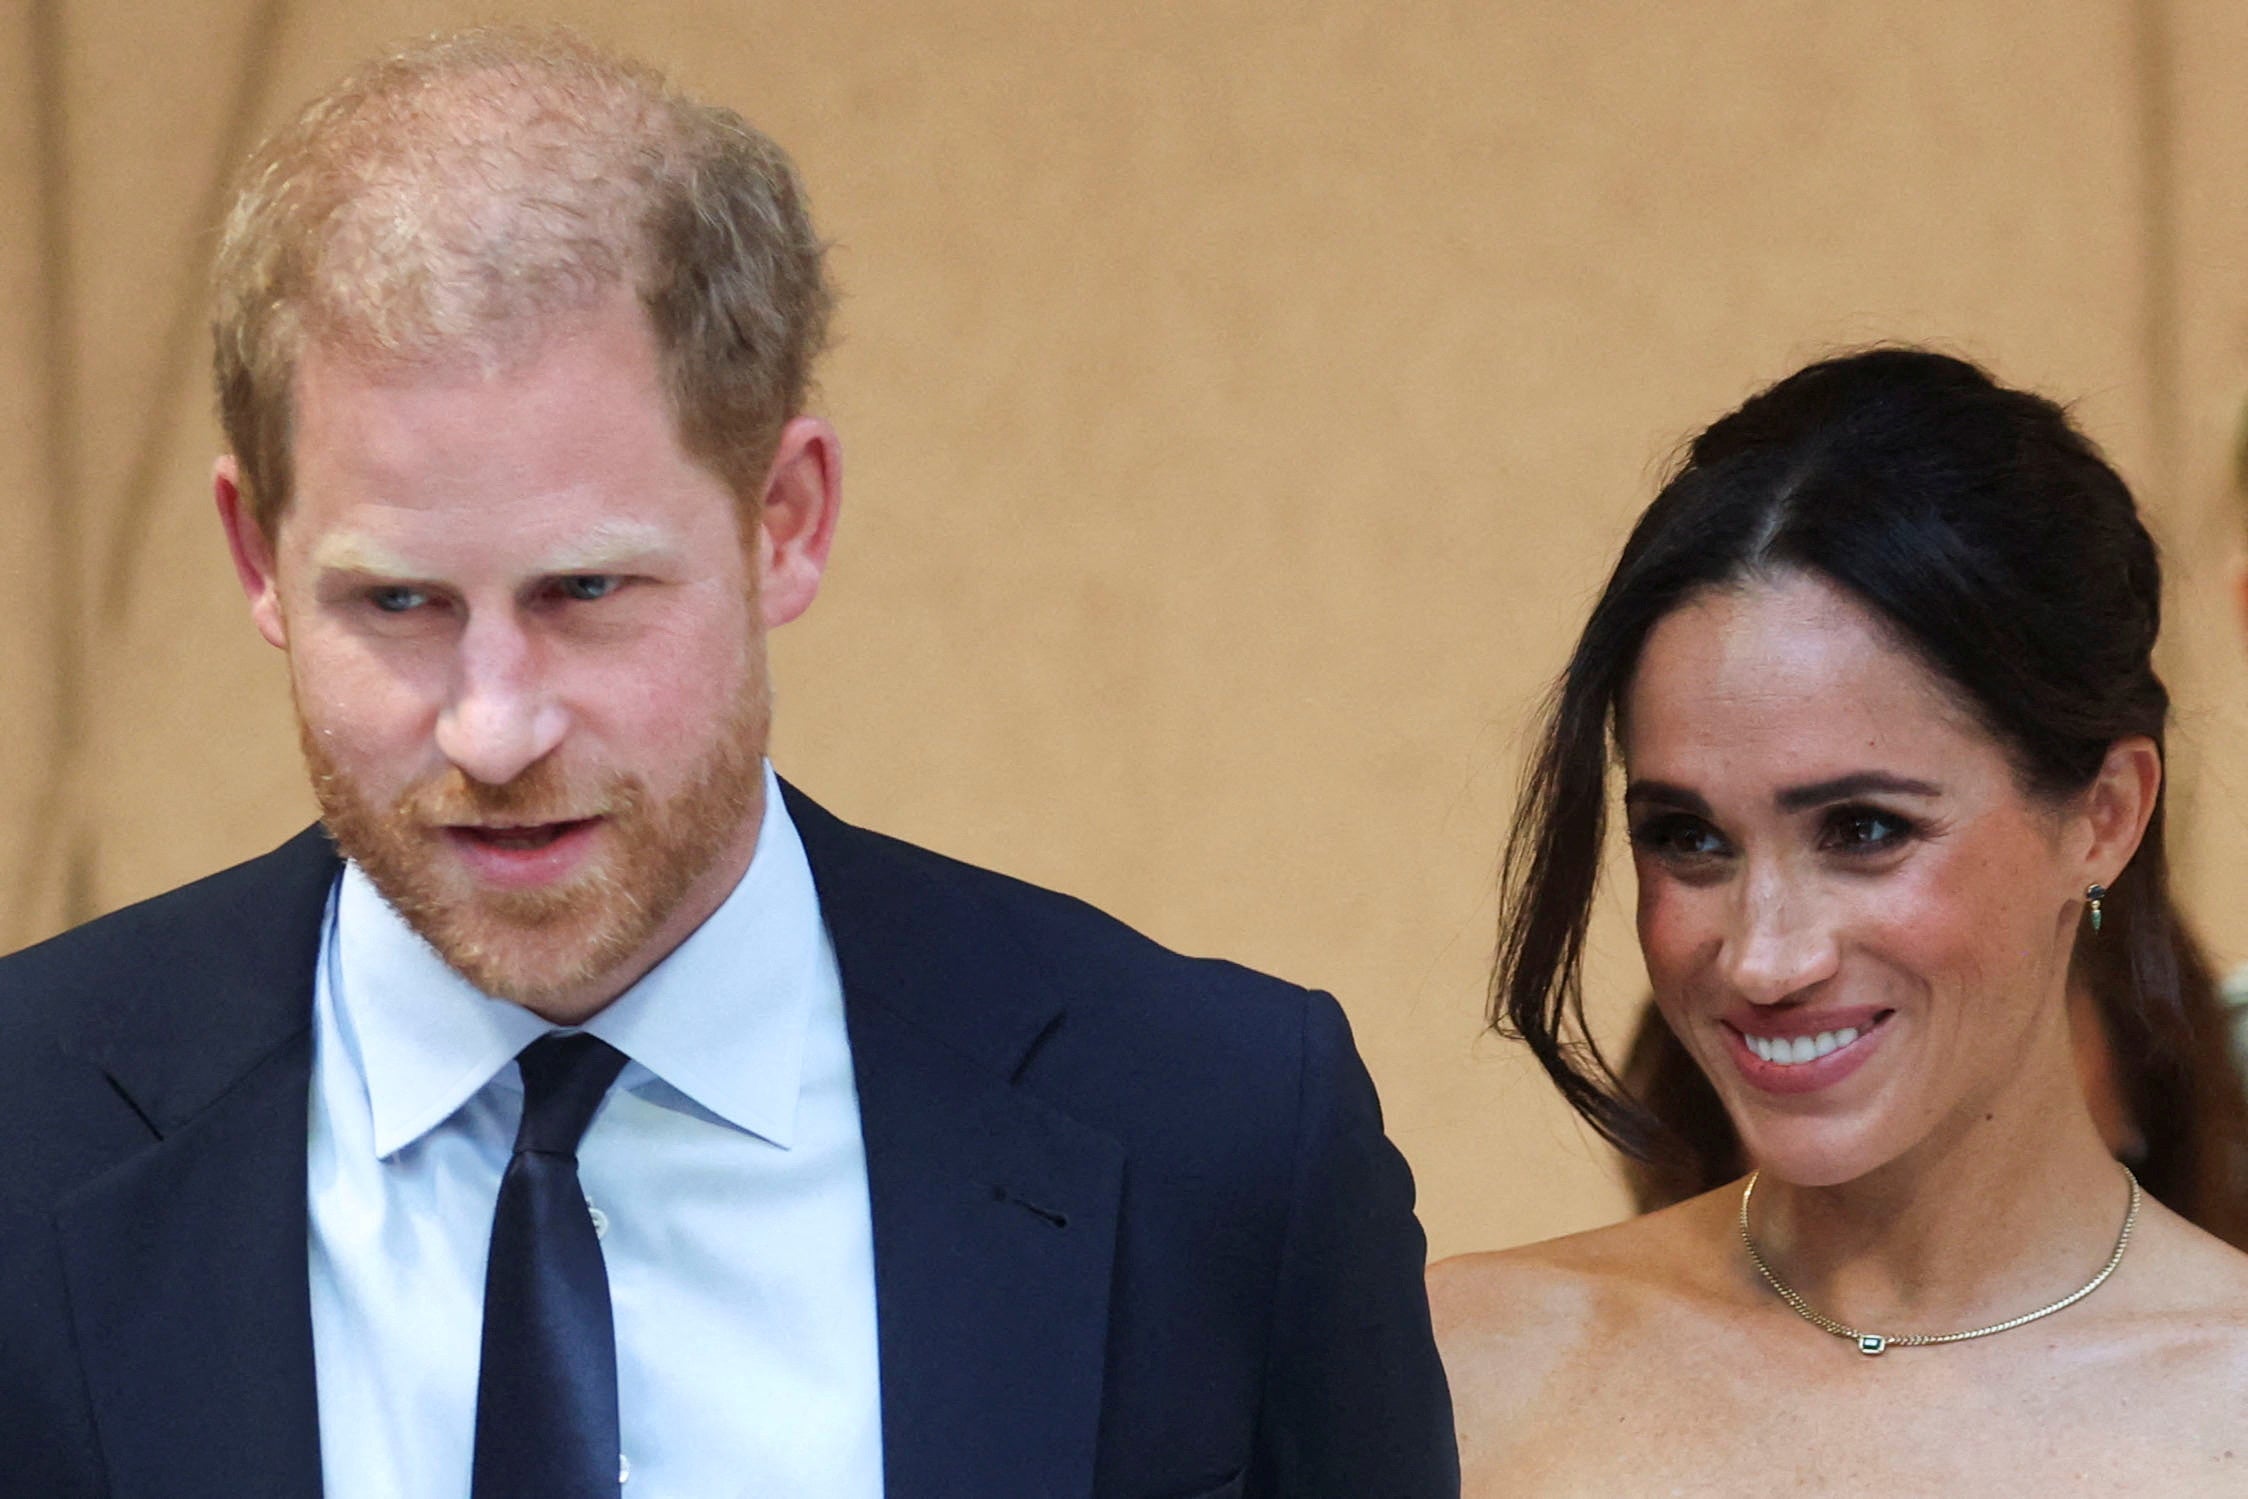 Harry and Meghan did not celebrate Christmas with the royals this year